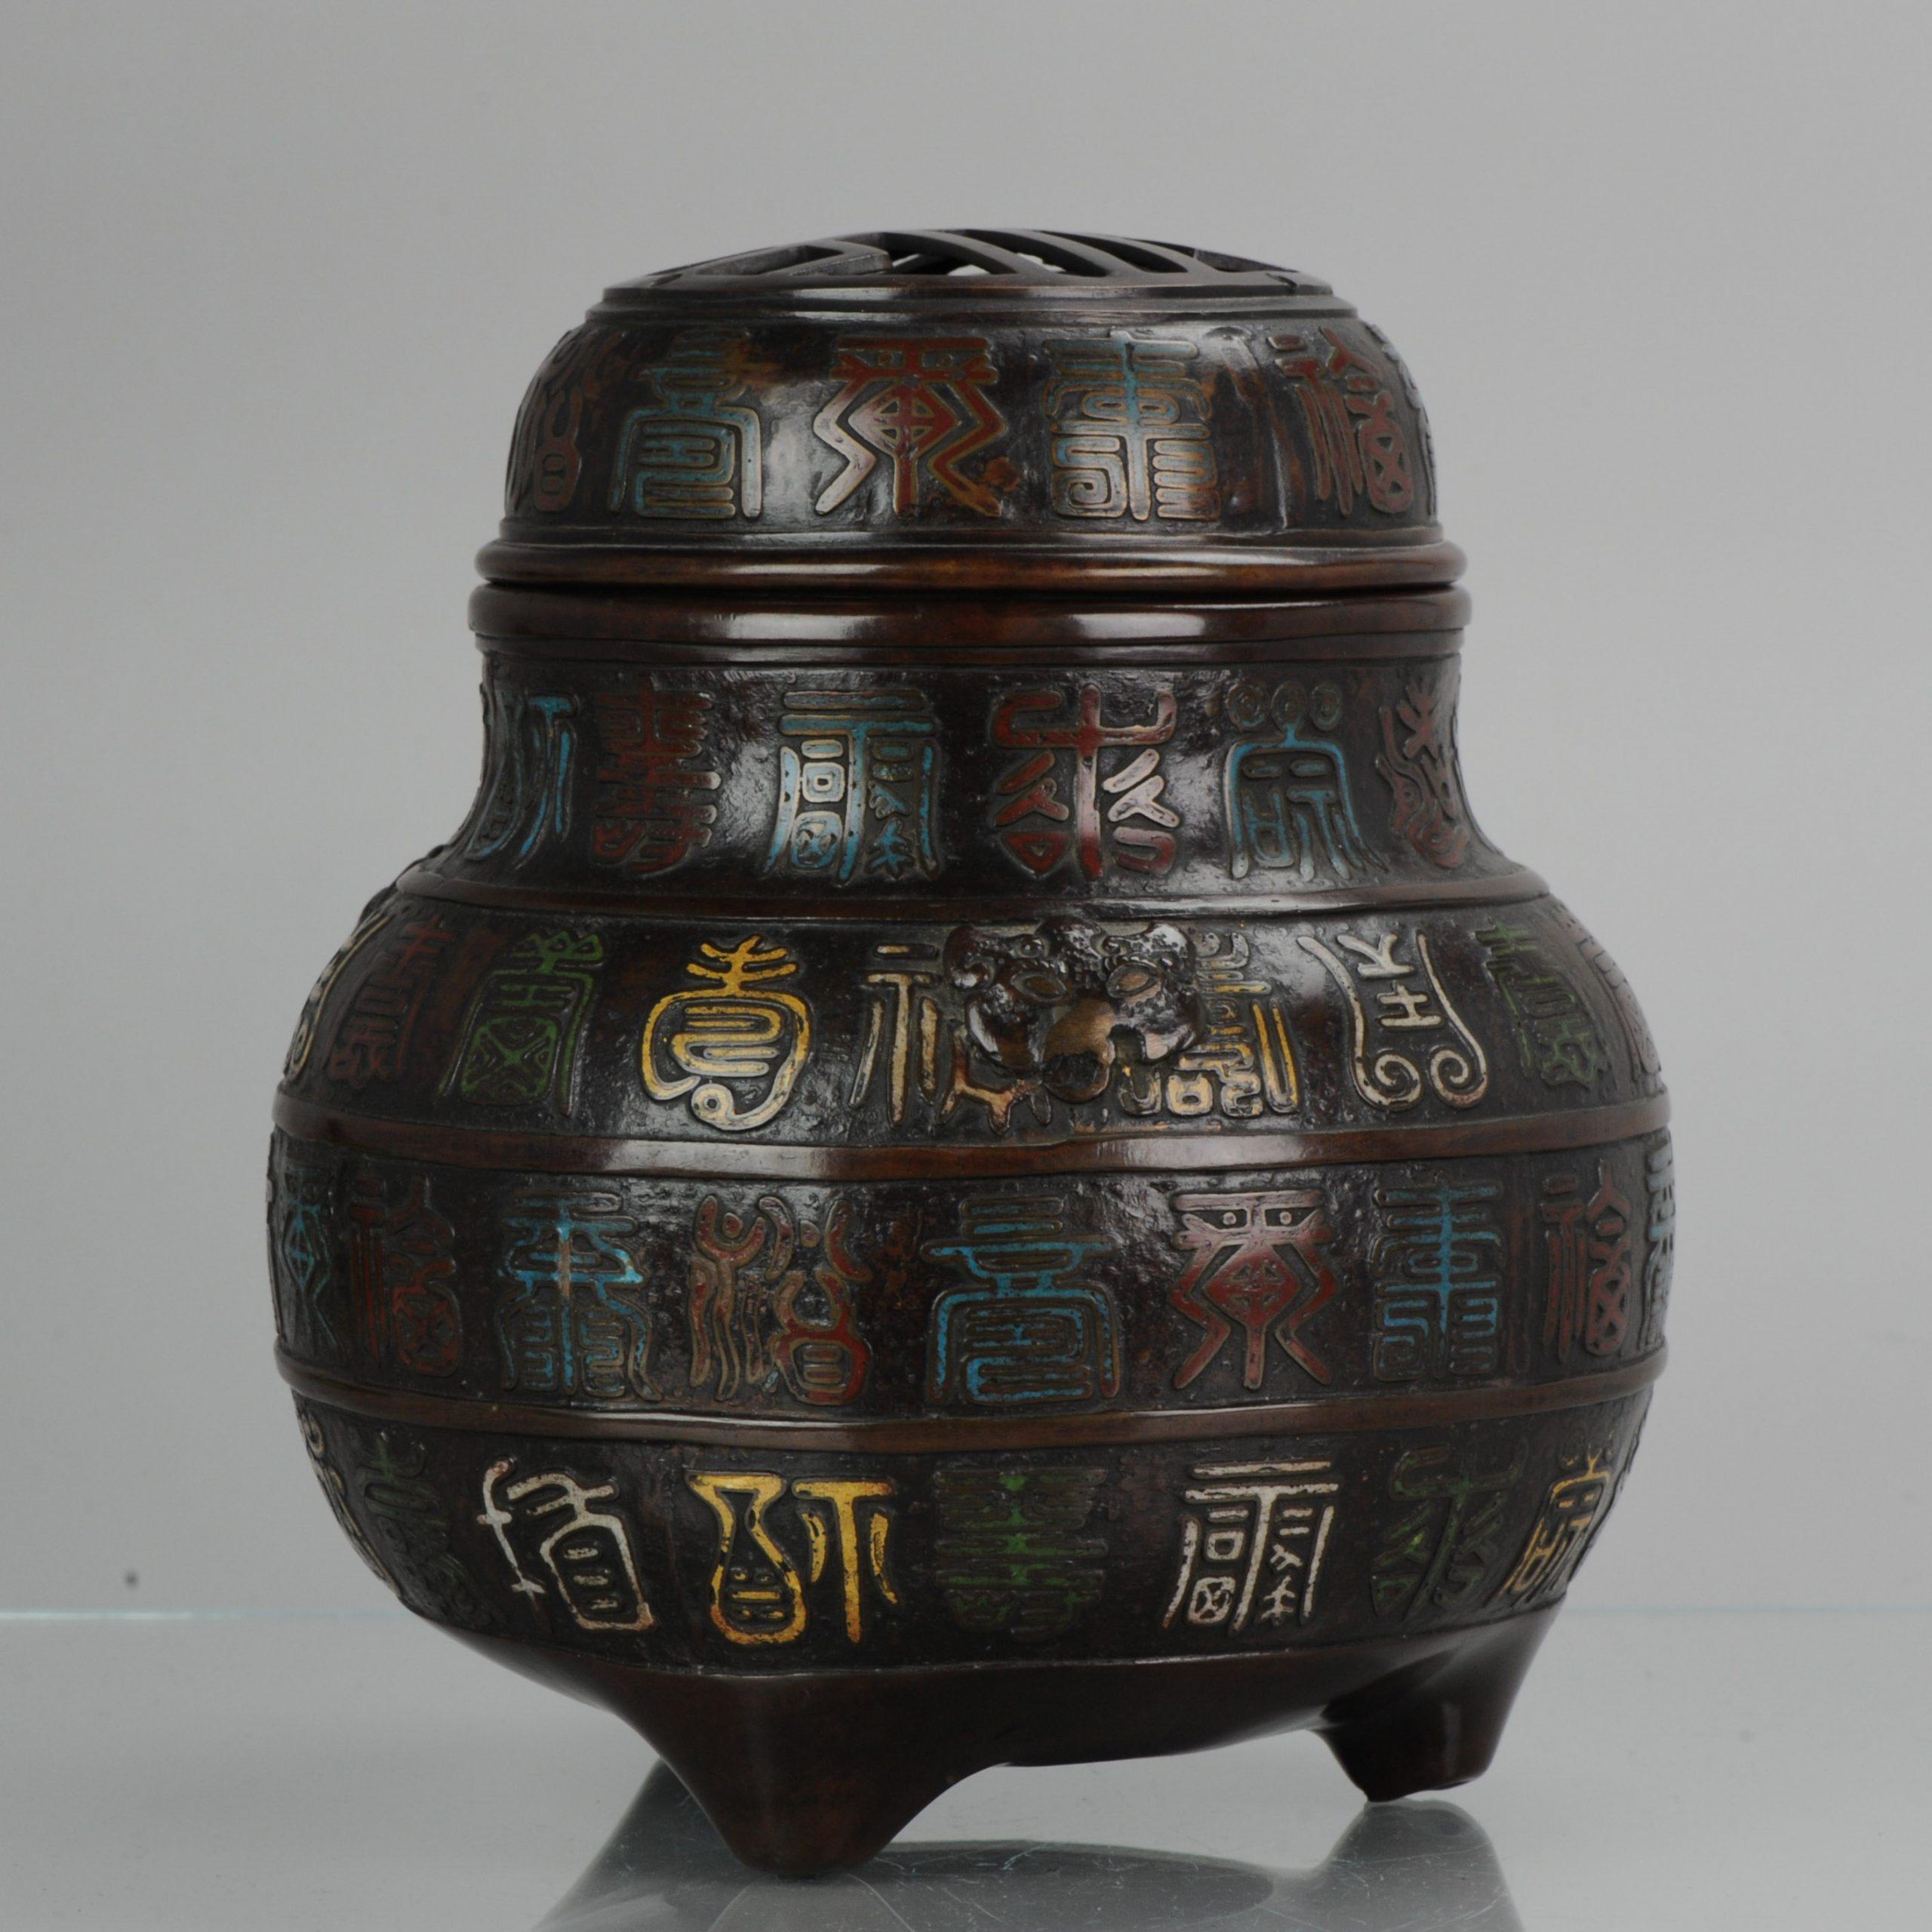 A tripod polychrome cloisonné incense burner, decorated with characters and masks. Unmarked, Japan, 19th century. Provenance: collection Nieuwenhove.

 

 

Condition
Overall condition Perfect. Size 270mm high approximate.
Period
18th